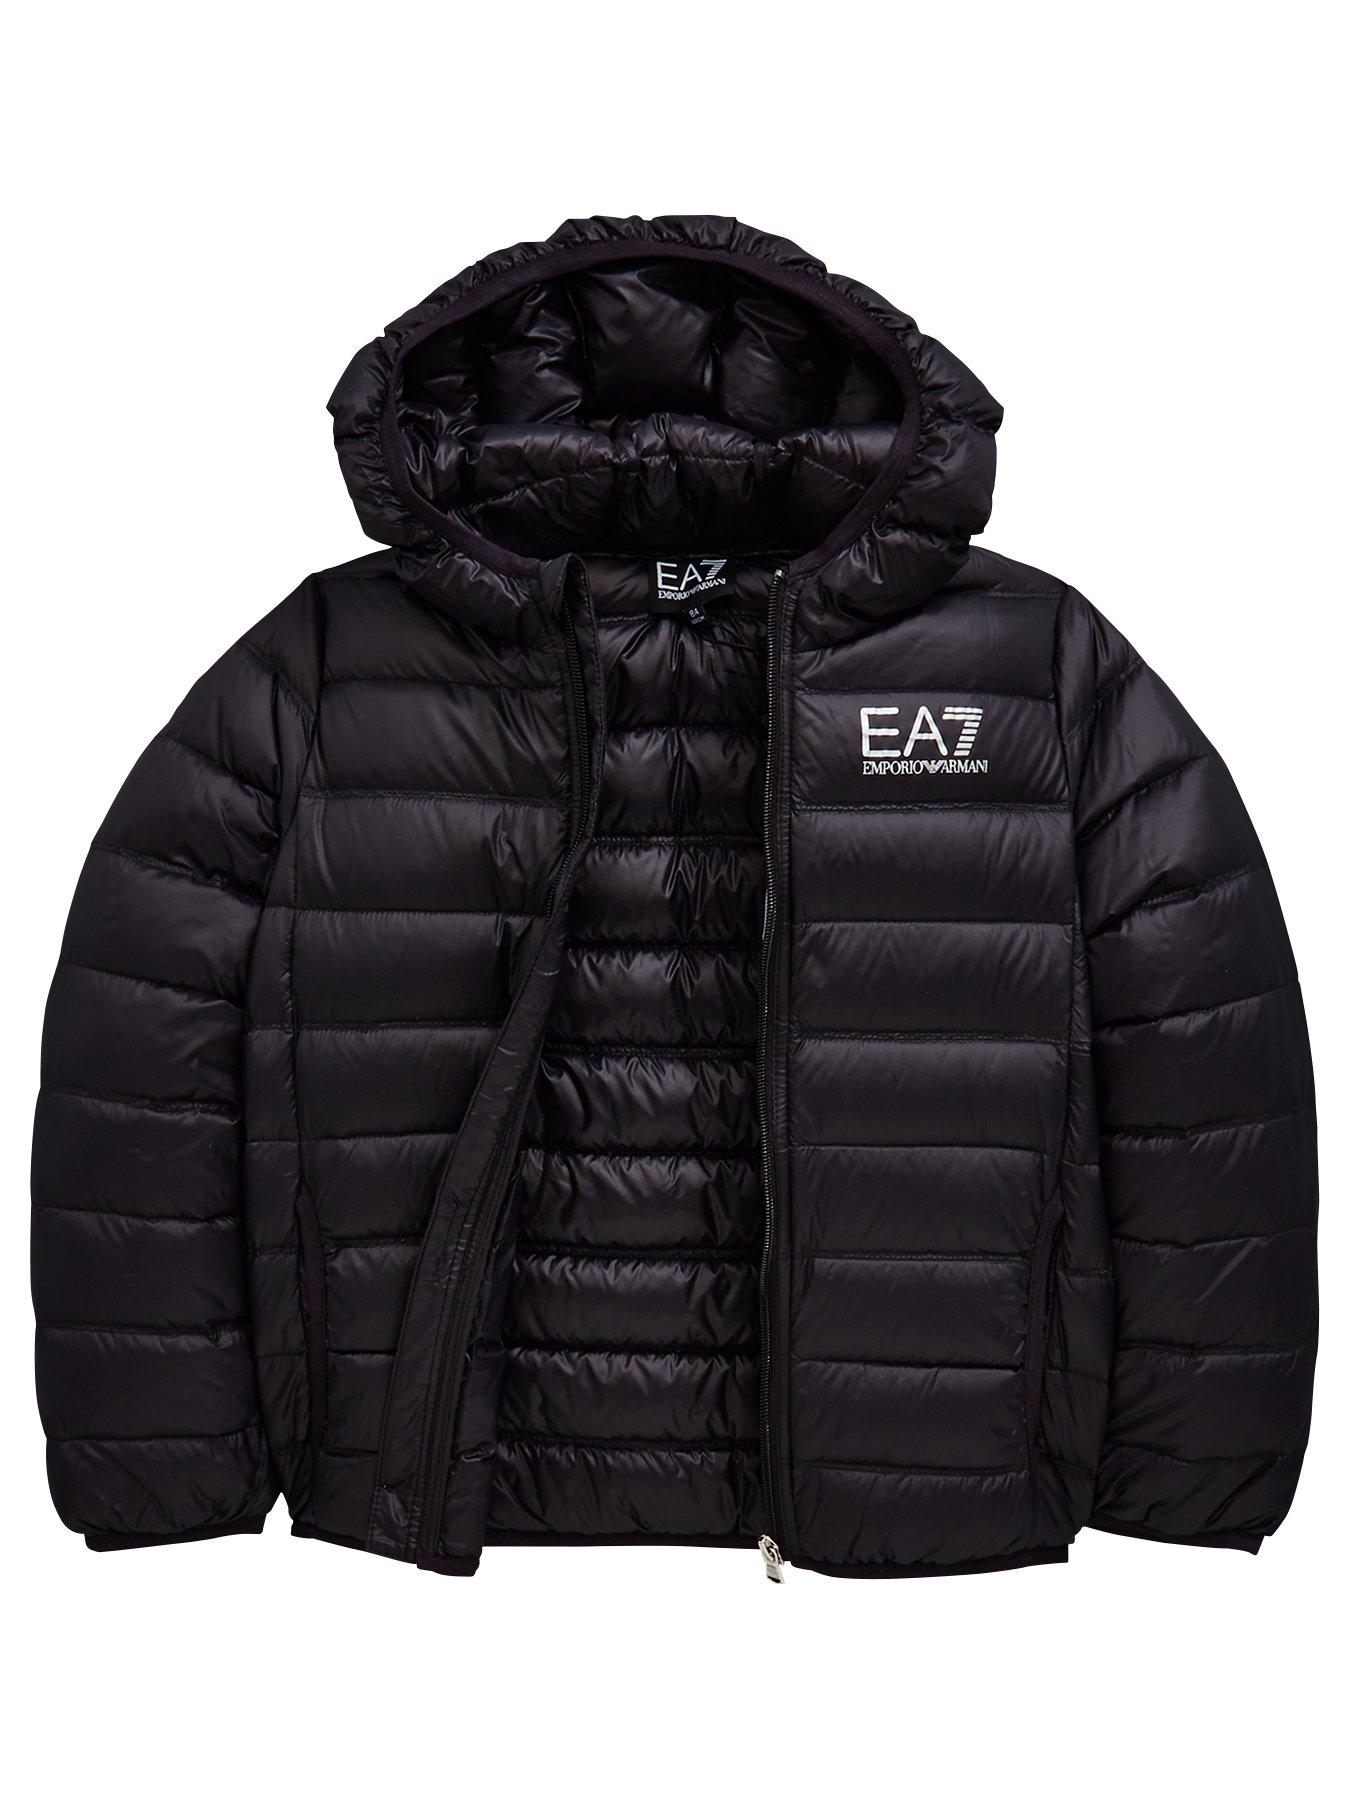  Boys Lightweight Down Quilted Jacket - Black